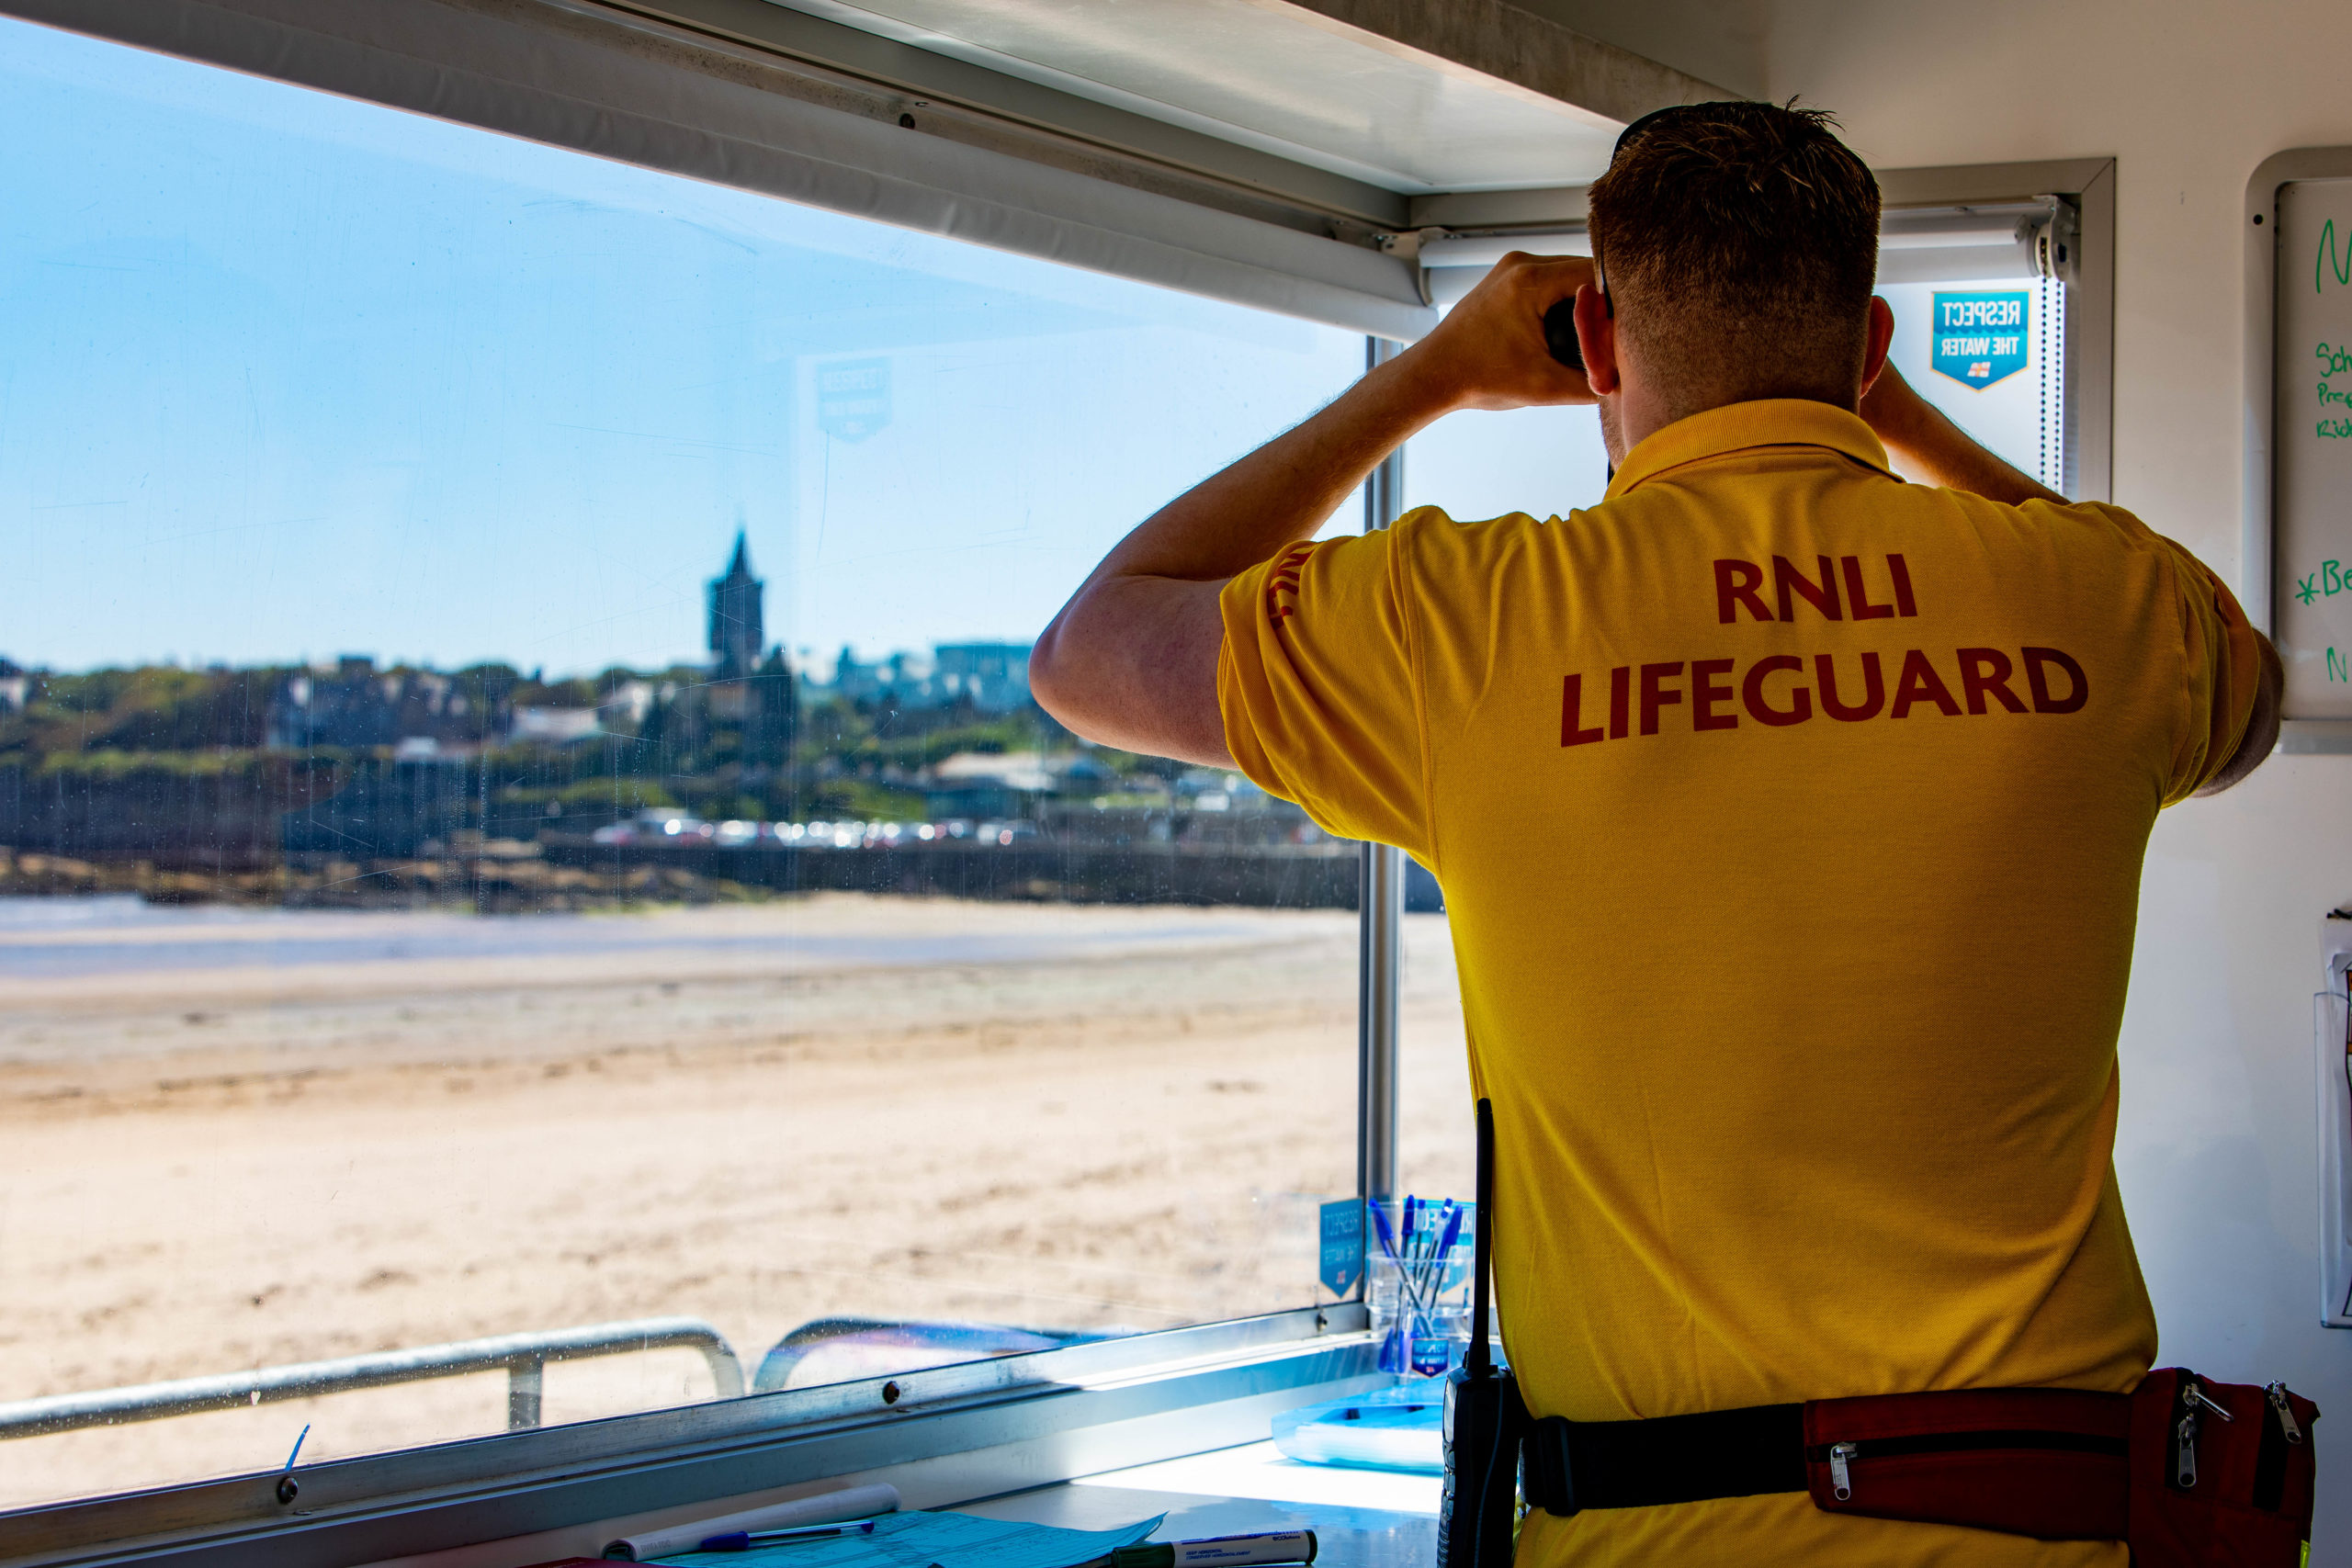 MP fears lifeguards could leave to look for work elsewhere increasing fears for public safety.